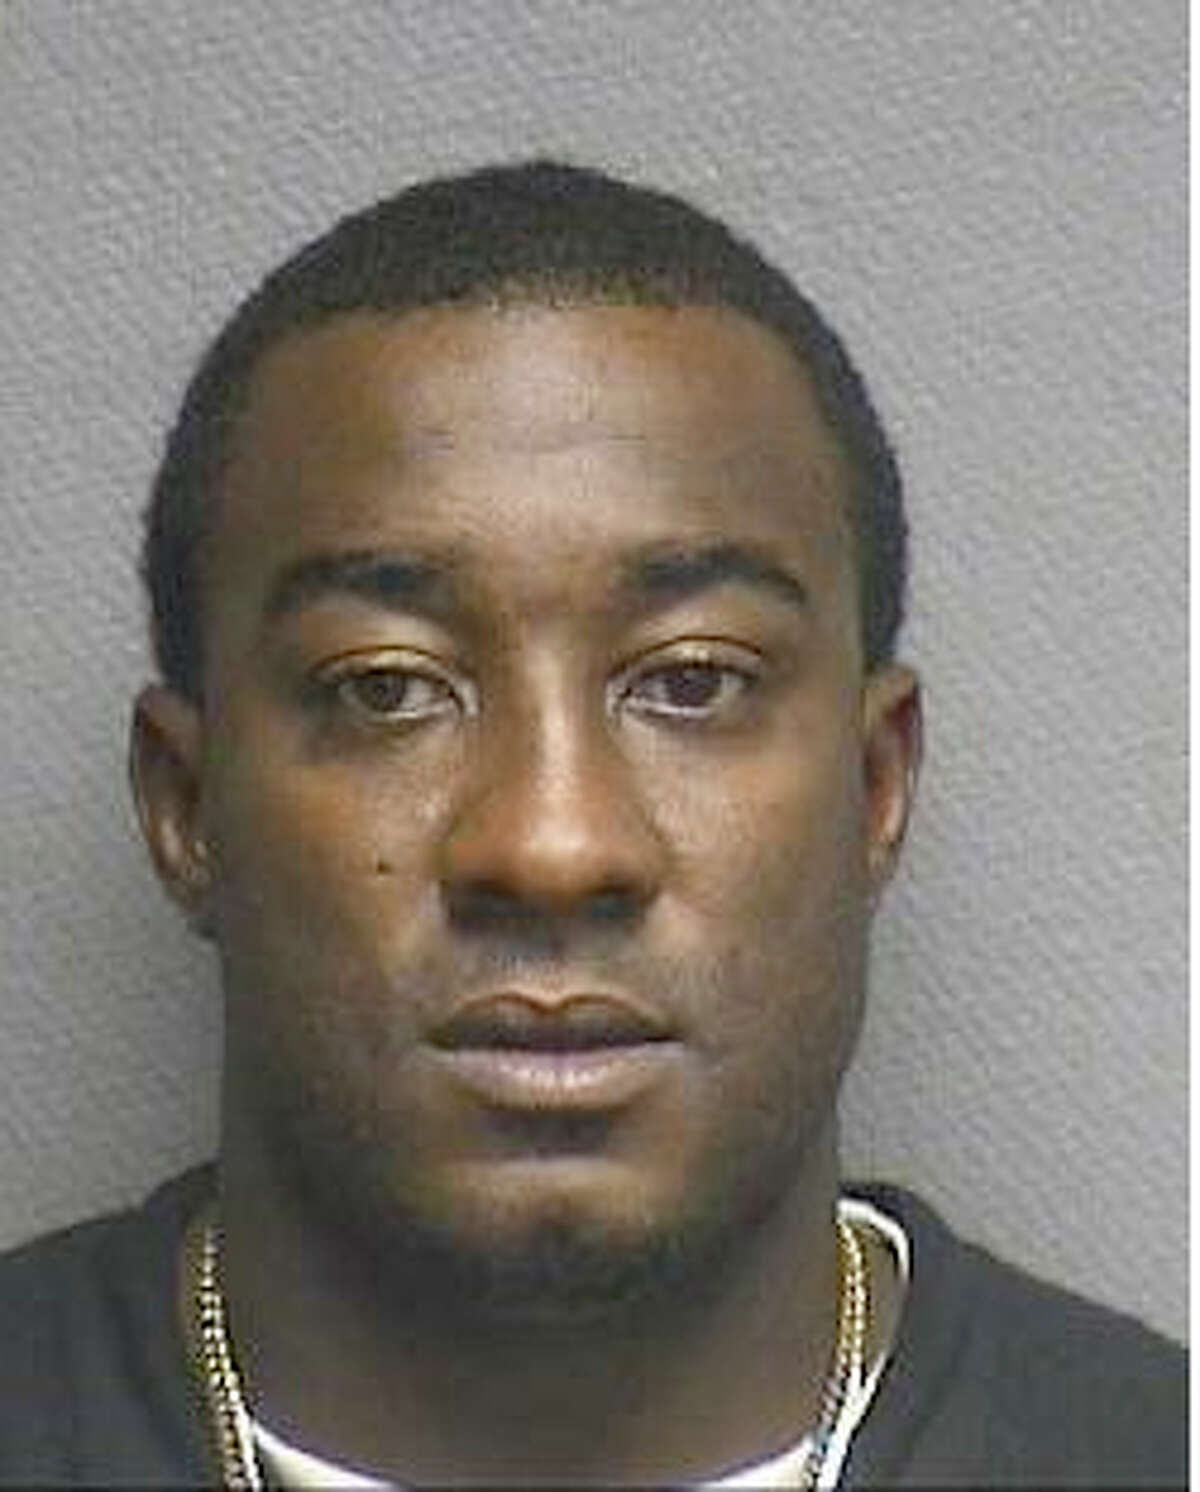 Lydell Grant (DOB: 3-19-77) is charged with murder in the 351st State District Court. He is accused in the killing of Aaron Michael Scheerhoorn, 28, of Houston, who was pronounced dead at Ben Taub General Hospital.